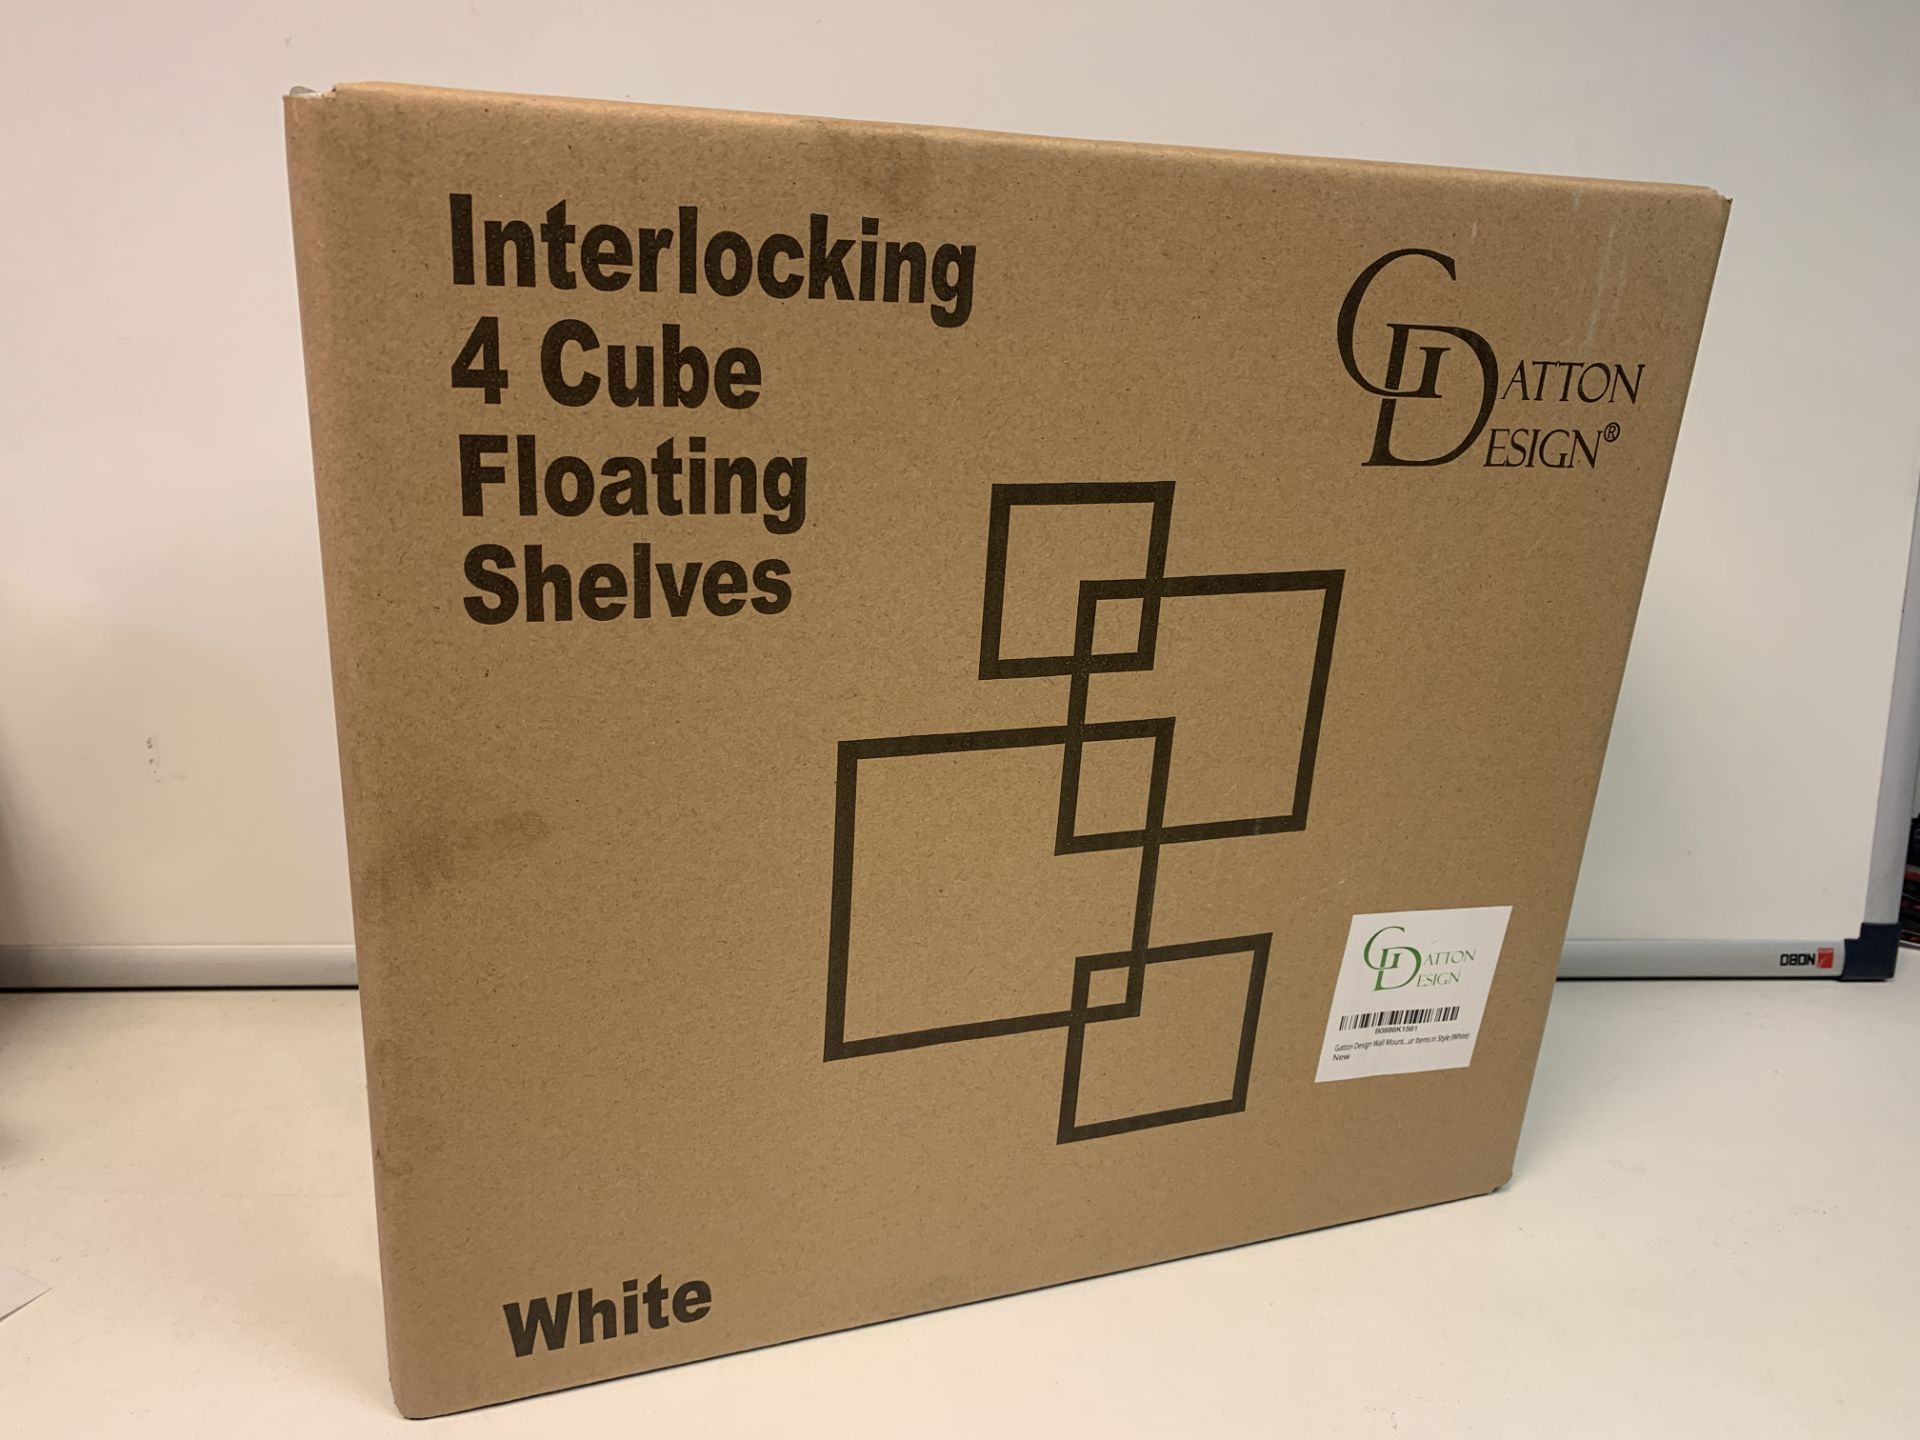 10 X NEW BOXED SETS OF GATTON DESIGN INTERLOCKING 4 CUBE FLOATING SHELVES IN WHITE. RRP £45 EACH